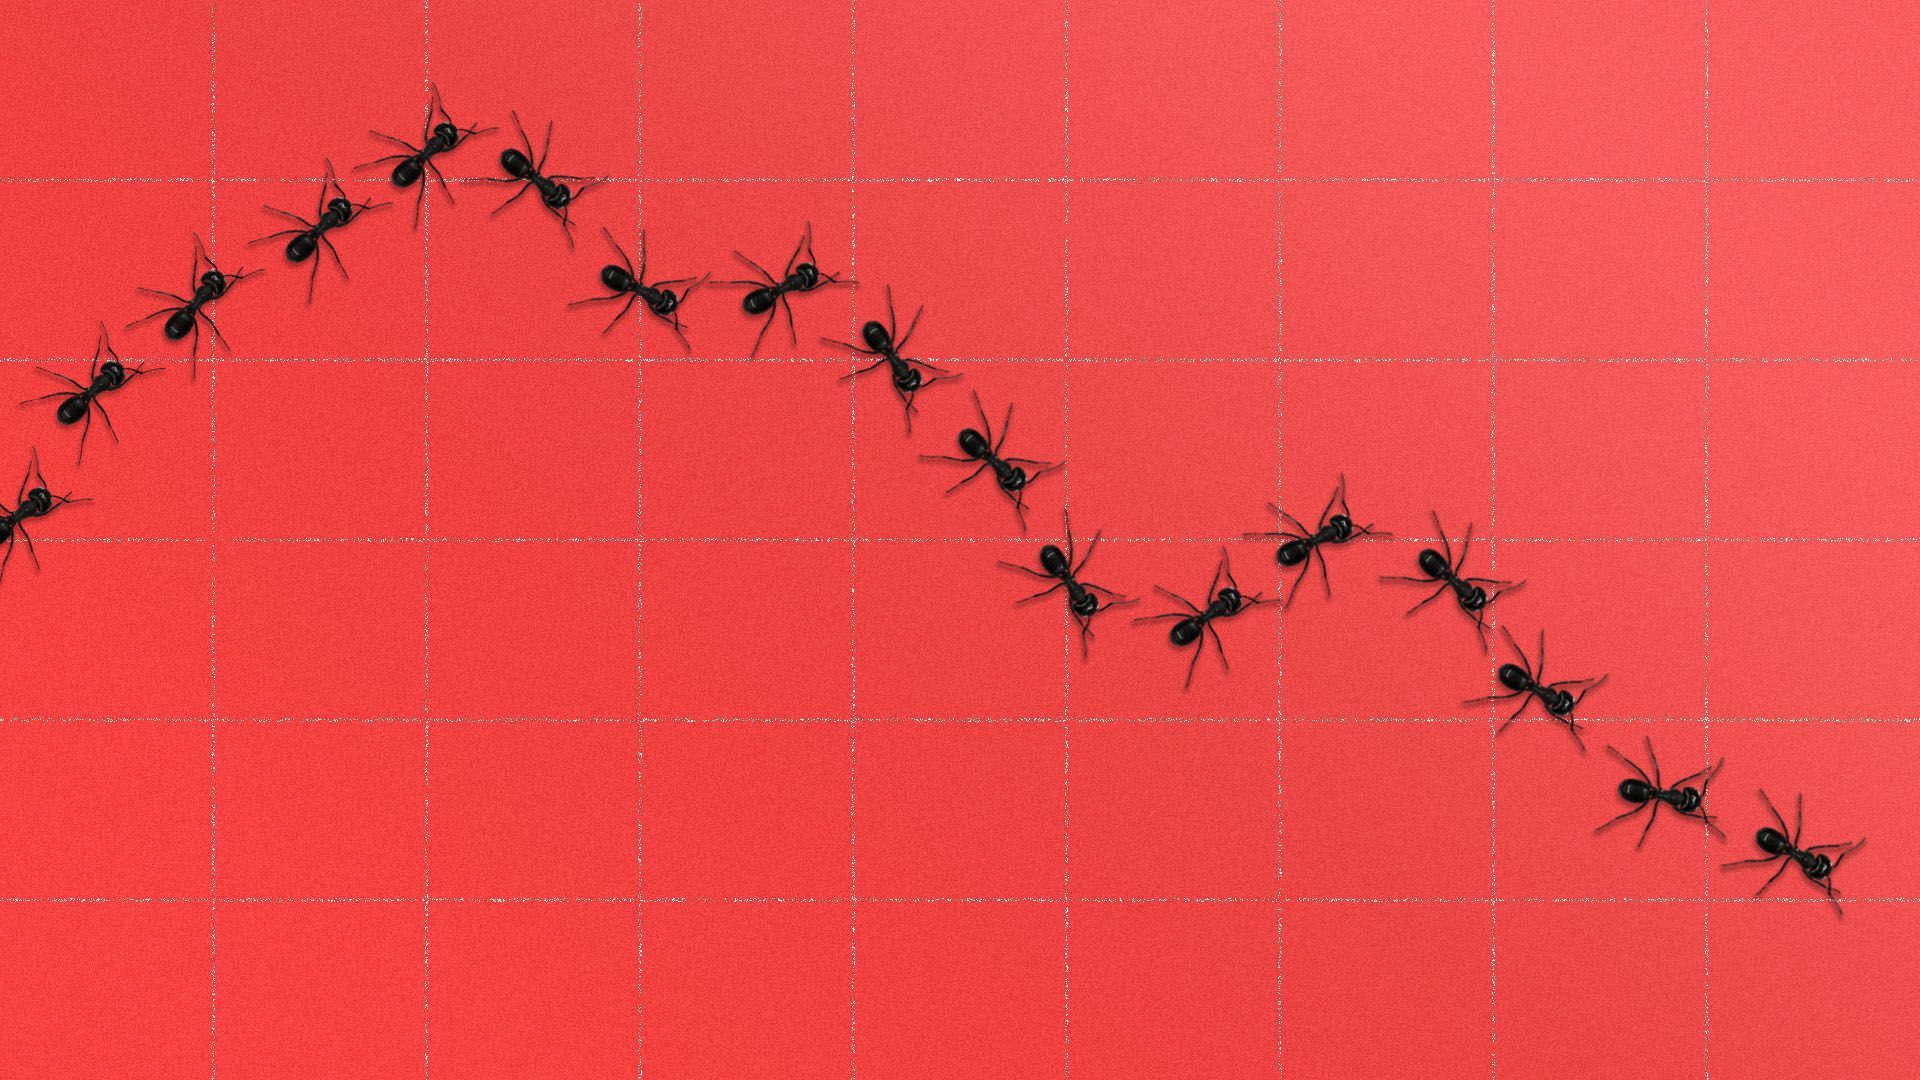 Ants forming a downward stock chart